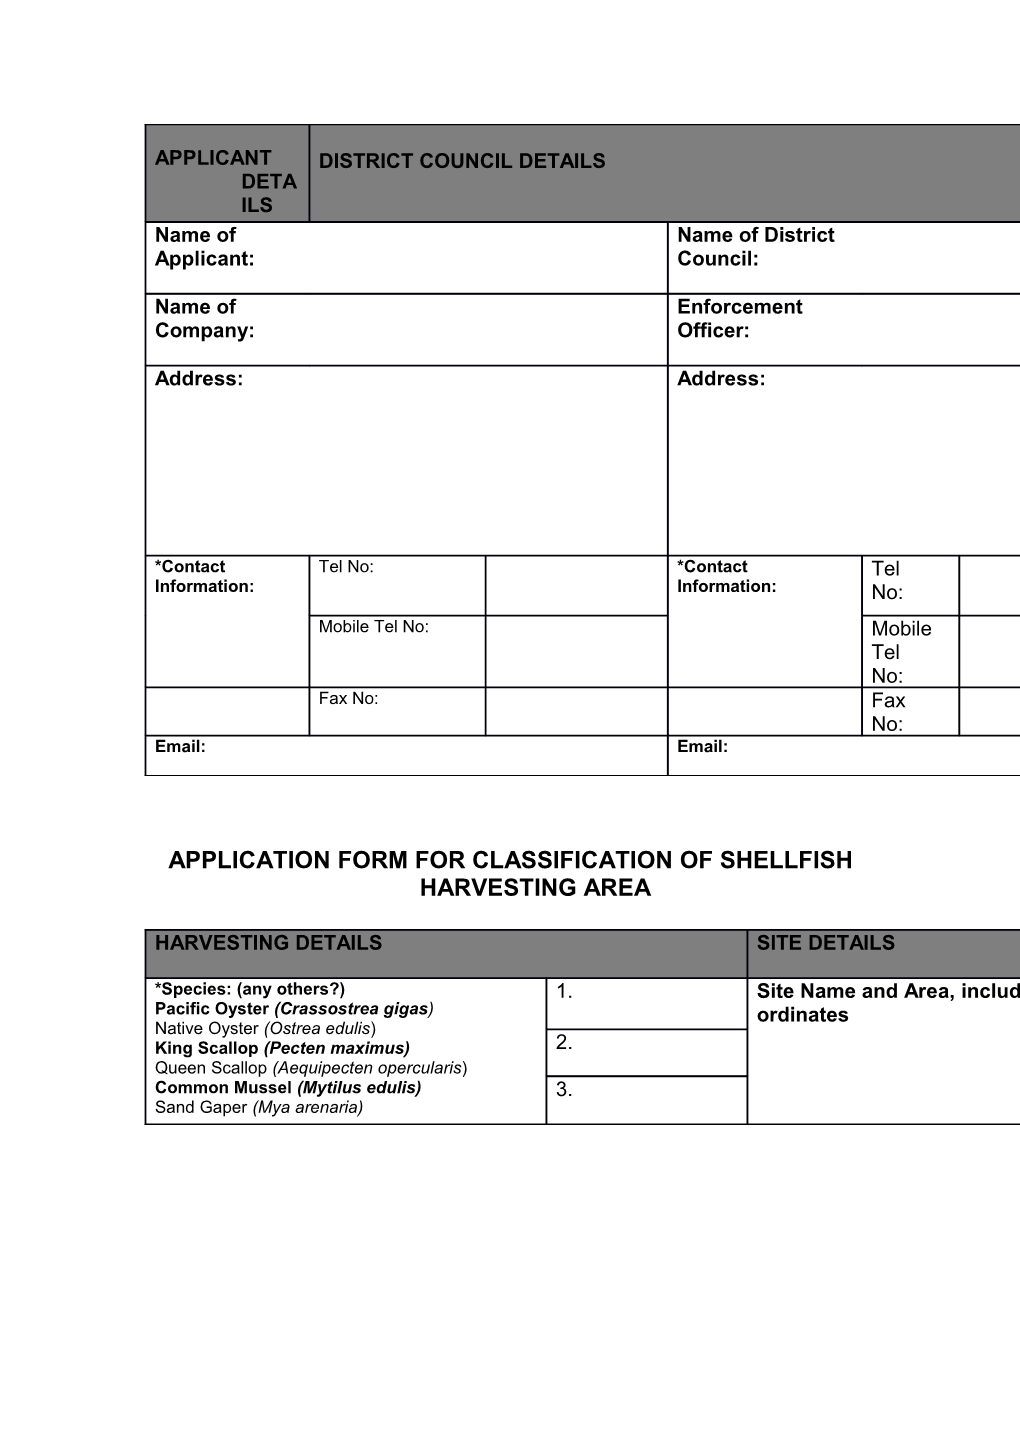 Application Form for Classification of Shellfish Harvesting Area